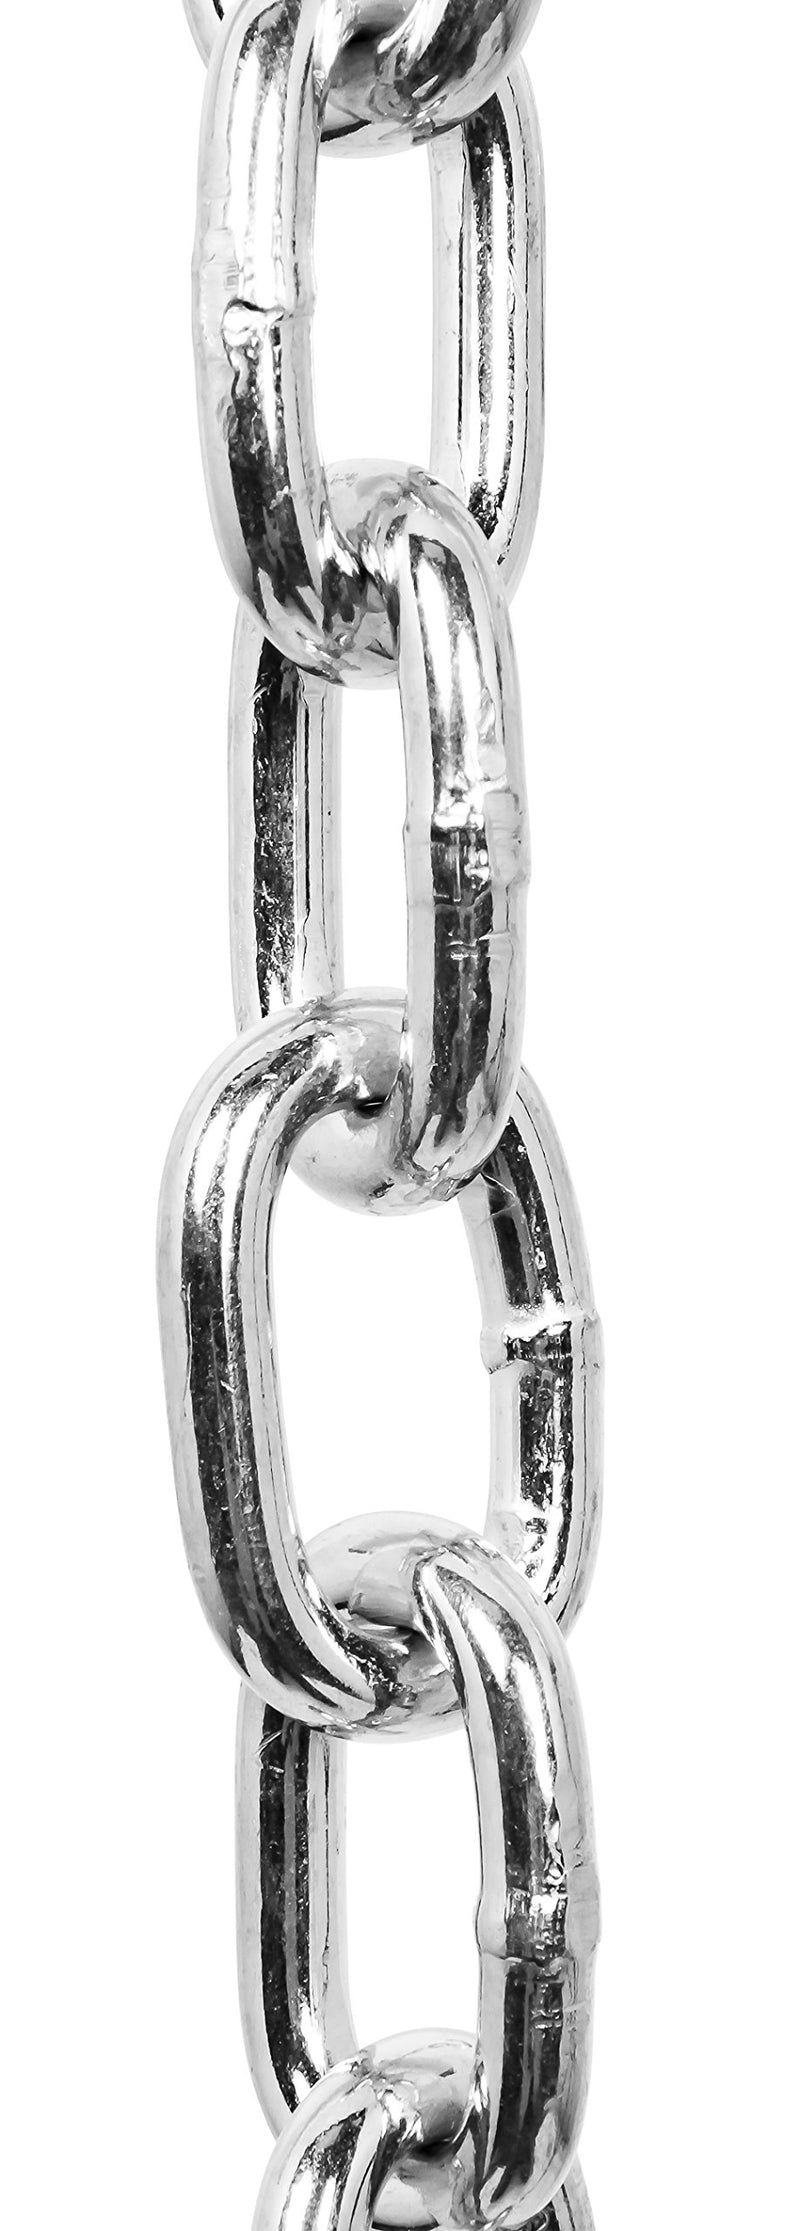  [AUSTRALIA] - Camco Heavy Duty Steel 48" Safety Chain with Spring Hooks - Secures Tow Vehicle to Trailer | Class I 2,000 lb Capacity | Great for RV, Trailer, and Boat Towing |Rust Resistant - (50022) 48" Length - 2,000 lb. Capacity